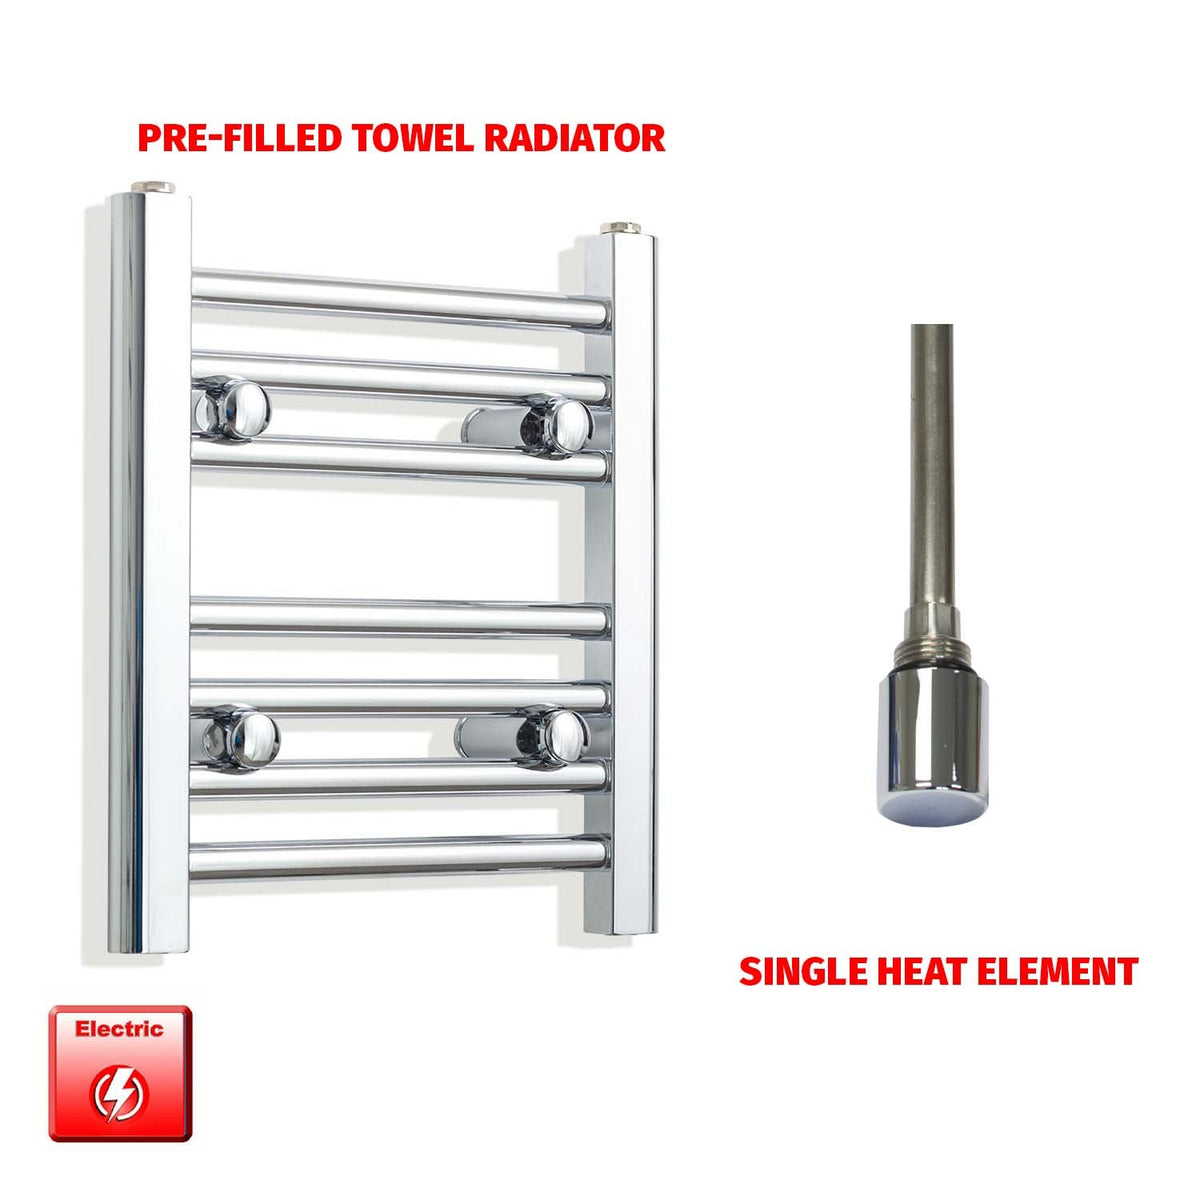 400mm High 350mm Wid Pre-Filled Electric Heated Towel Rail Radiator Straight Chrome Single heat element no timer